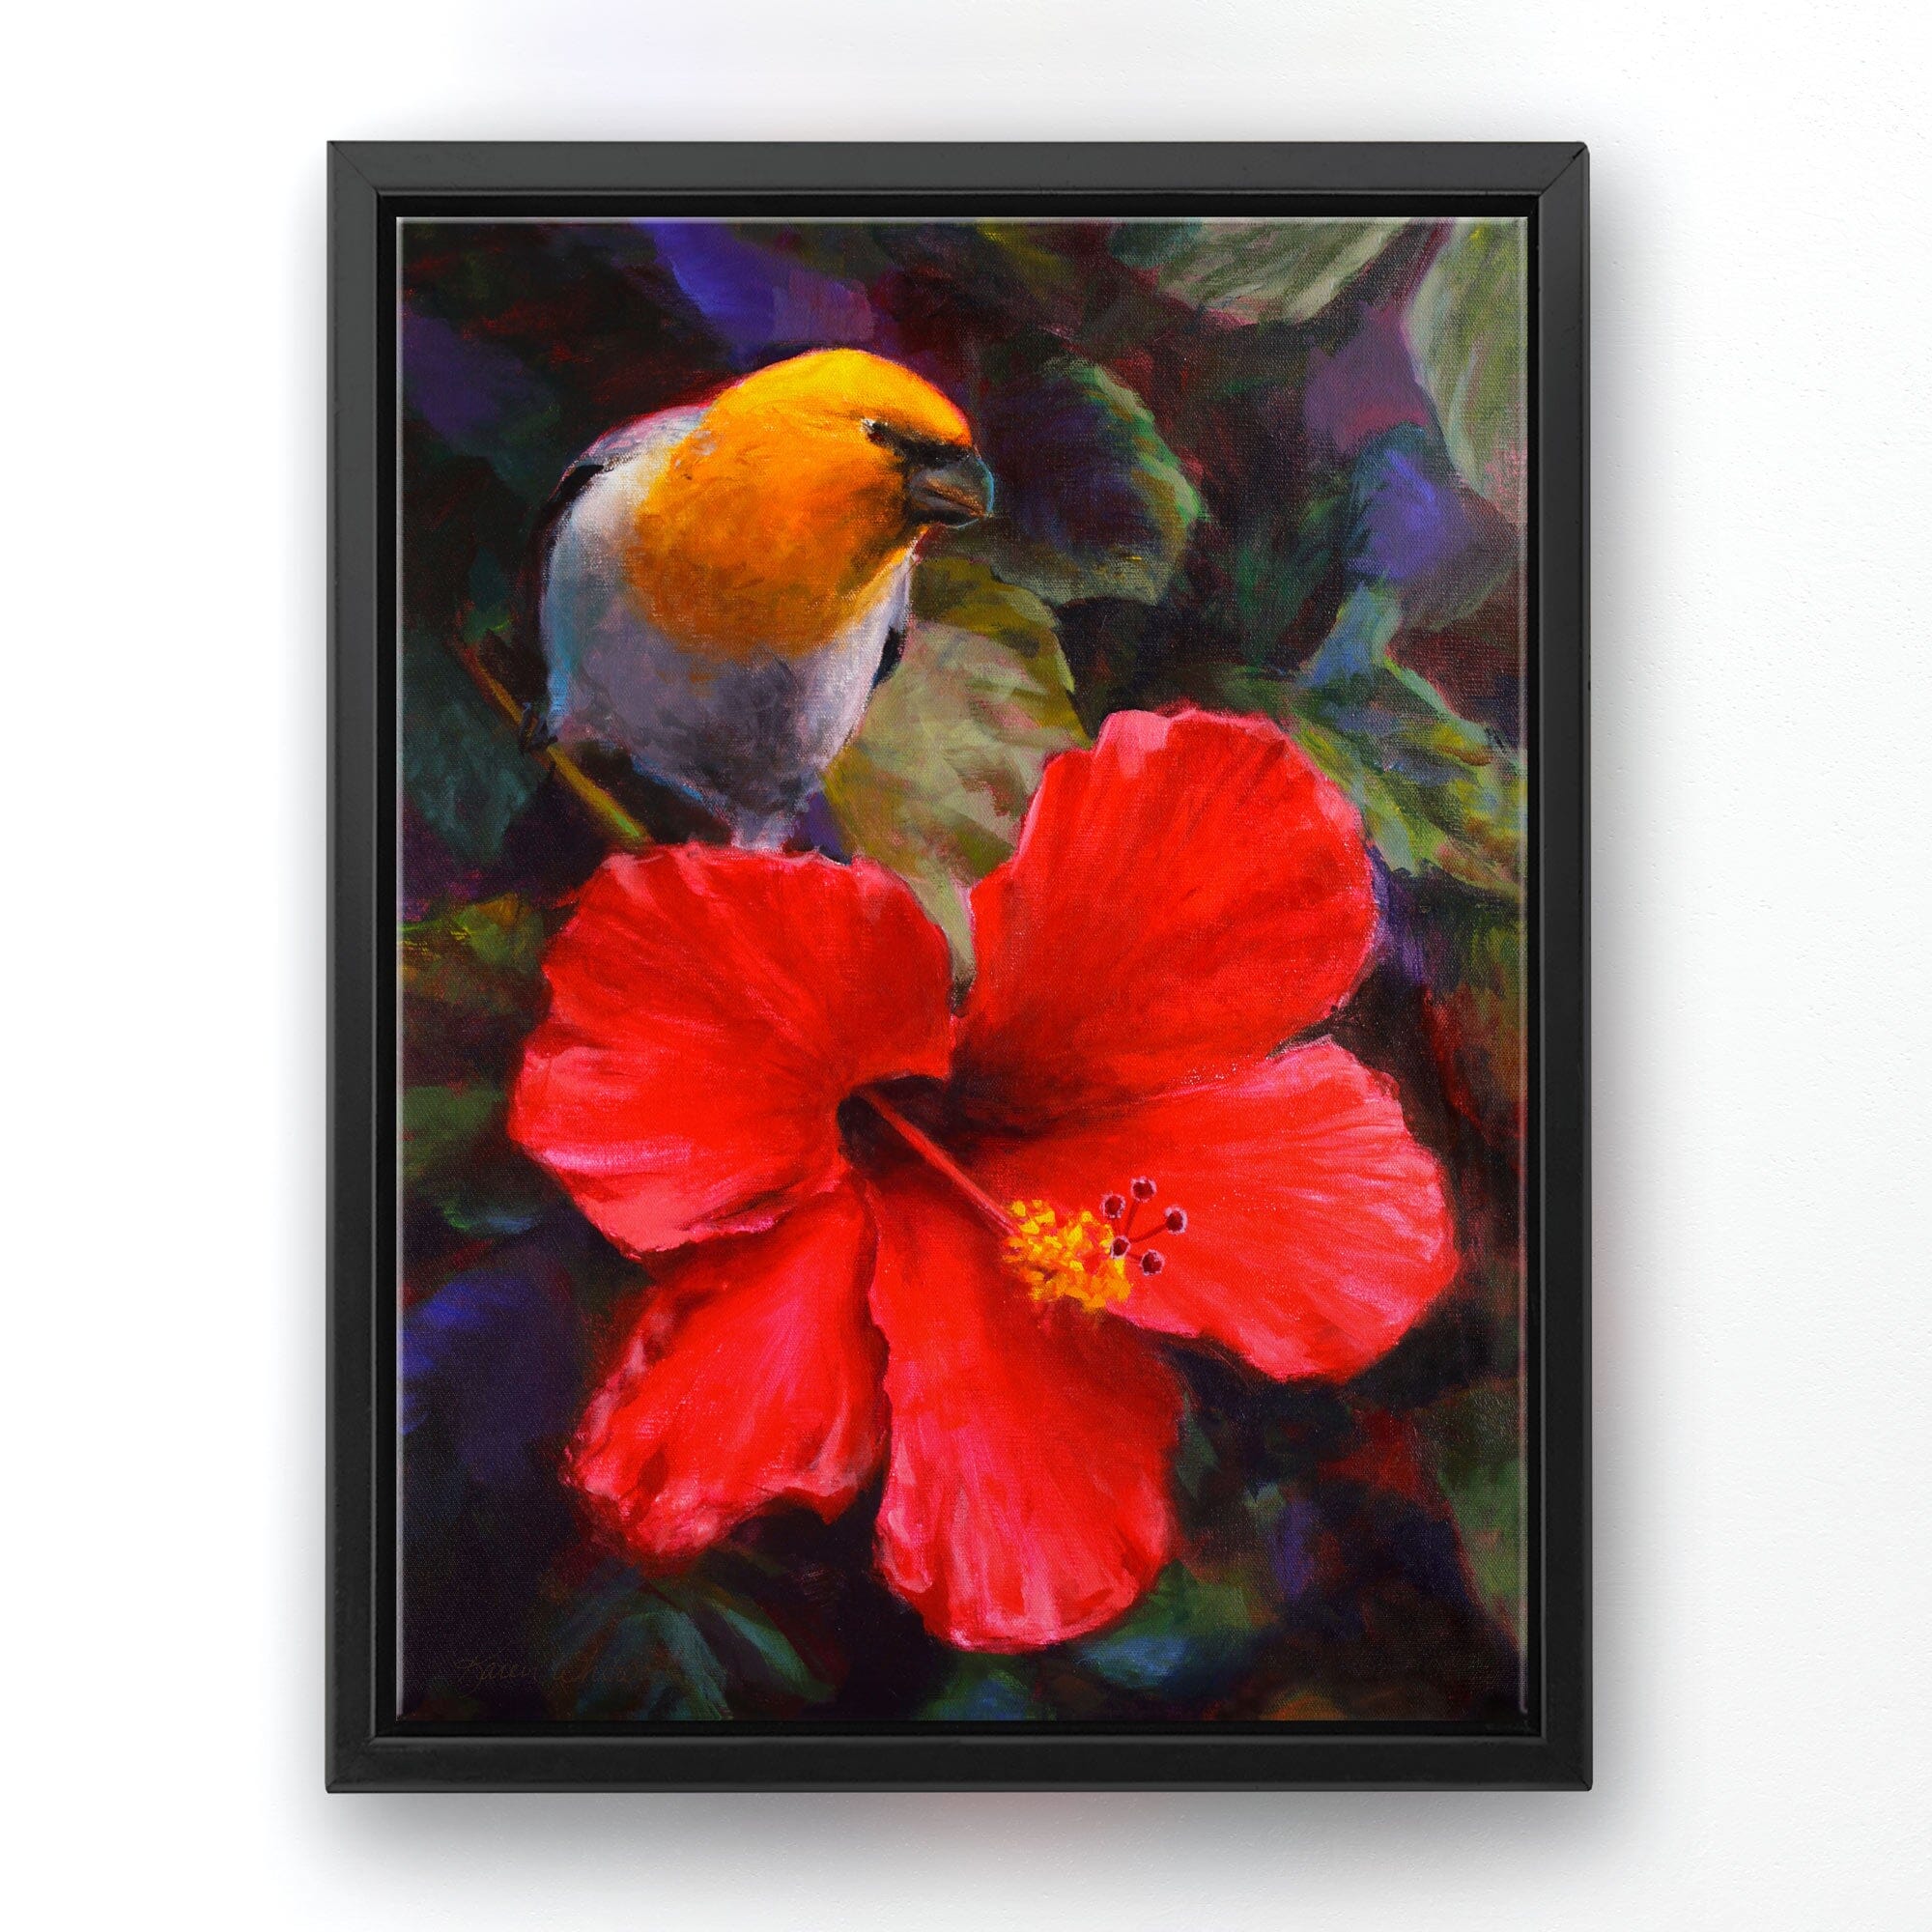 Tropical canvas art of Native Hawaiian Koki'o 'ula Hibiscus flower and and Palila bird by artist Karen Whitworth. The artwork is framed in a black floater frame and is hanging on a white wall.